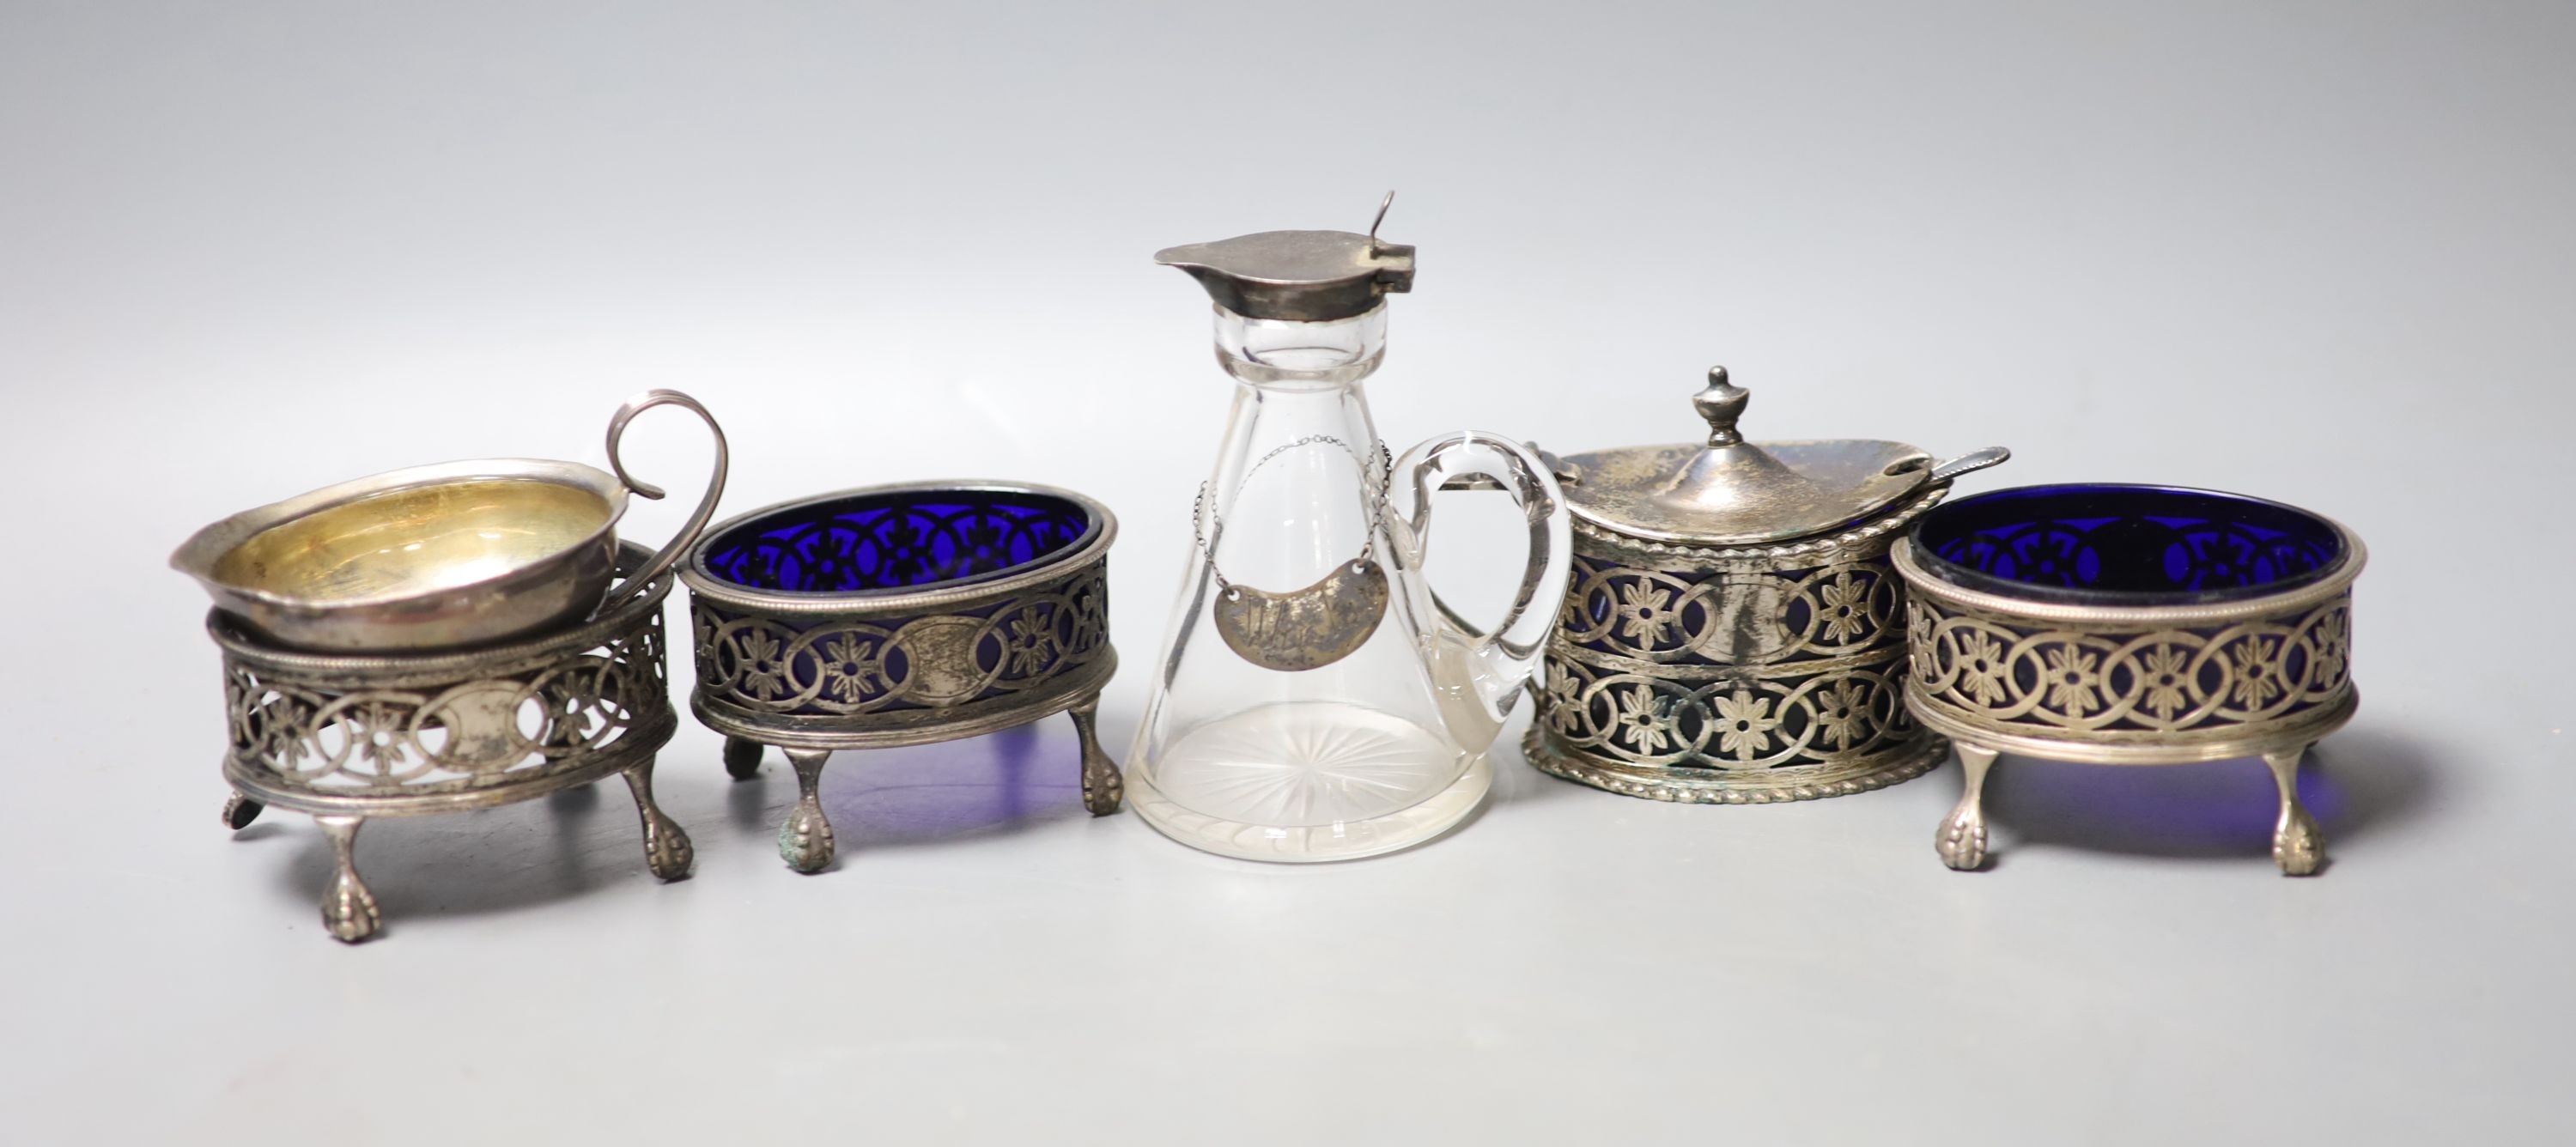 An Edwardian pierced silver oval mustard pot, with liner, a set of three similar salts, one lacking liner, a silver mounted glass whisky tot jug and a small continental jug.